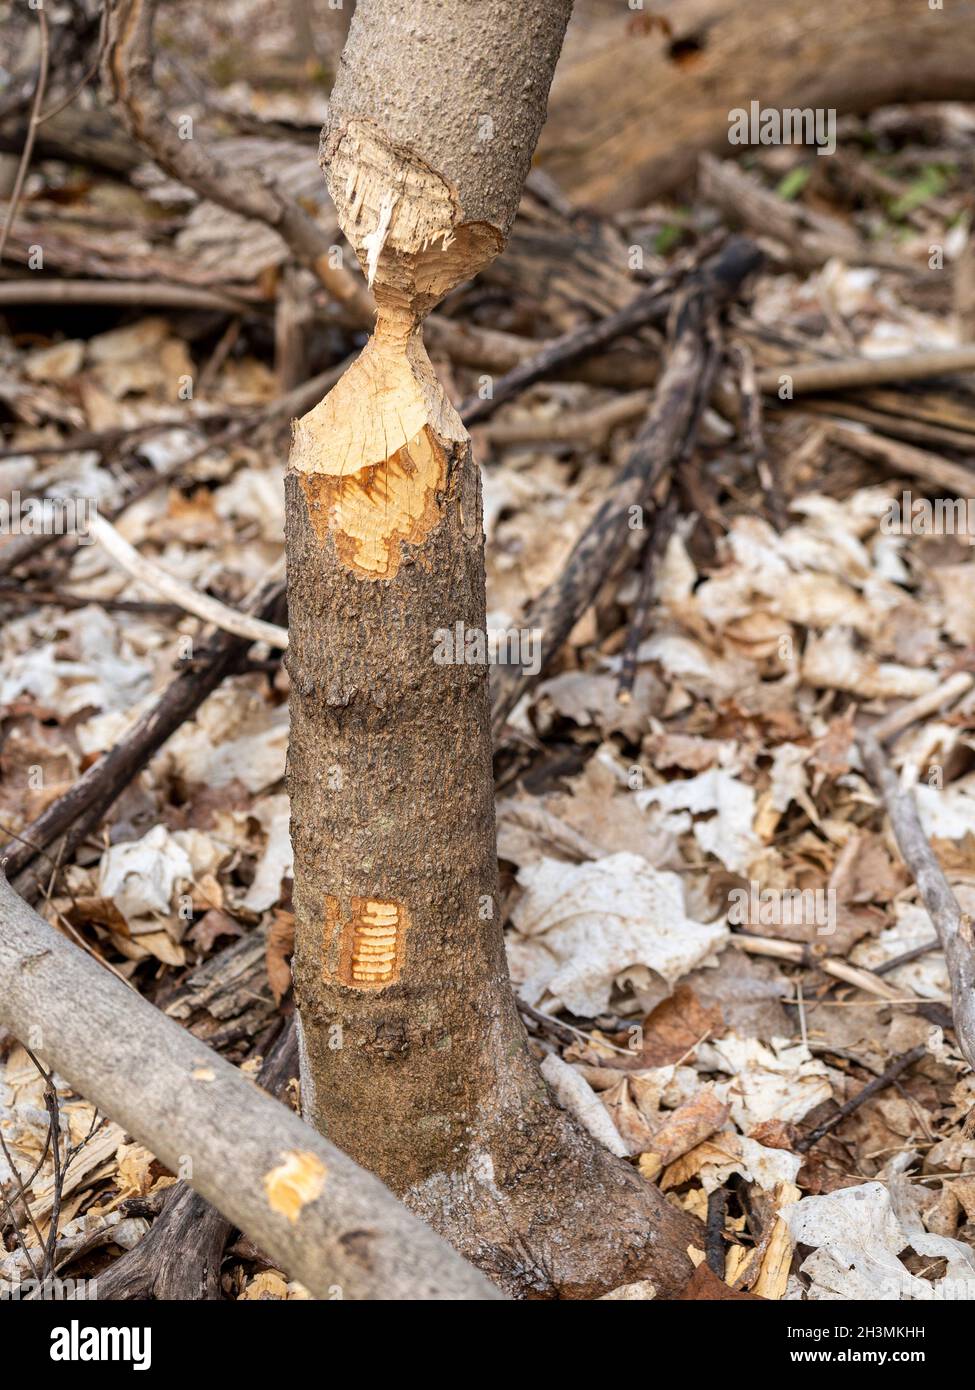 Almost: A sapling almost cut through by a Beaver: A small tree trunk chewed by a beaver until it is about to fall.  Still standing until the next cutting session. Stock Photo